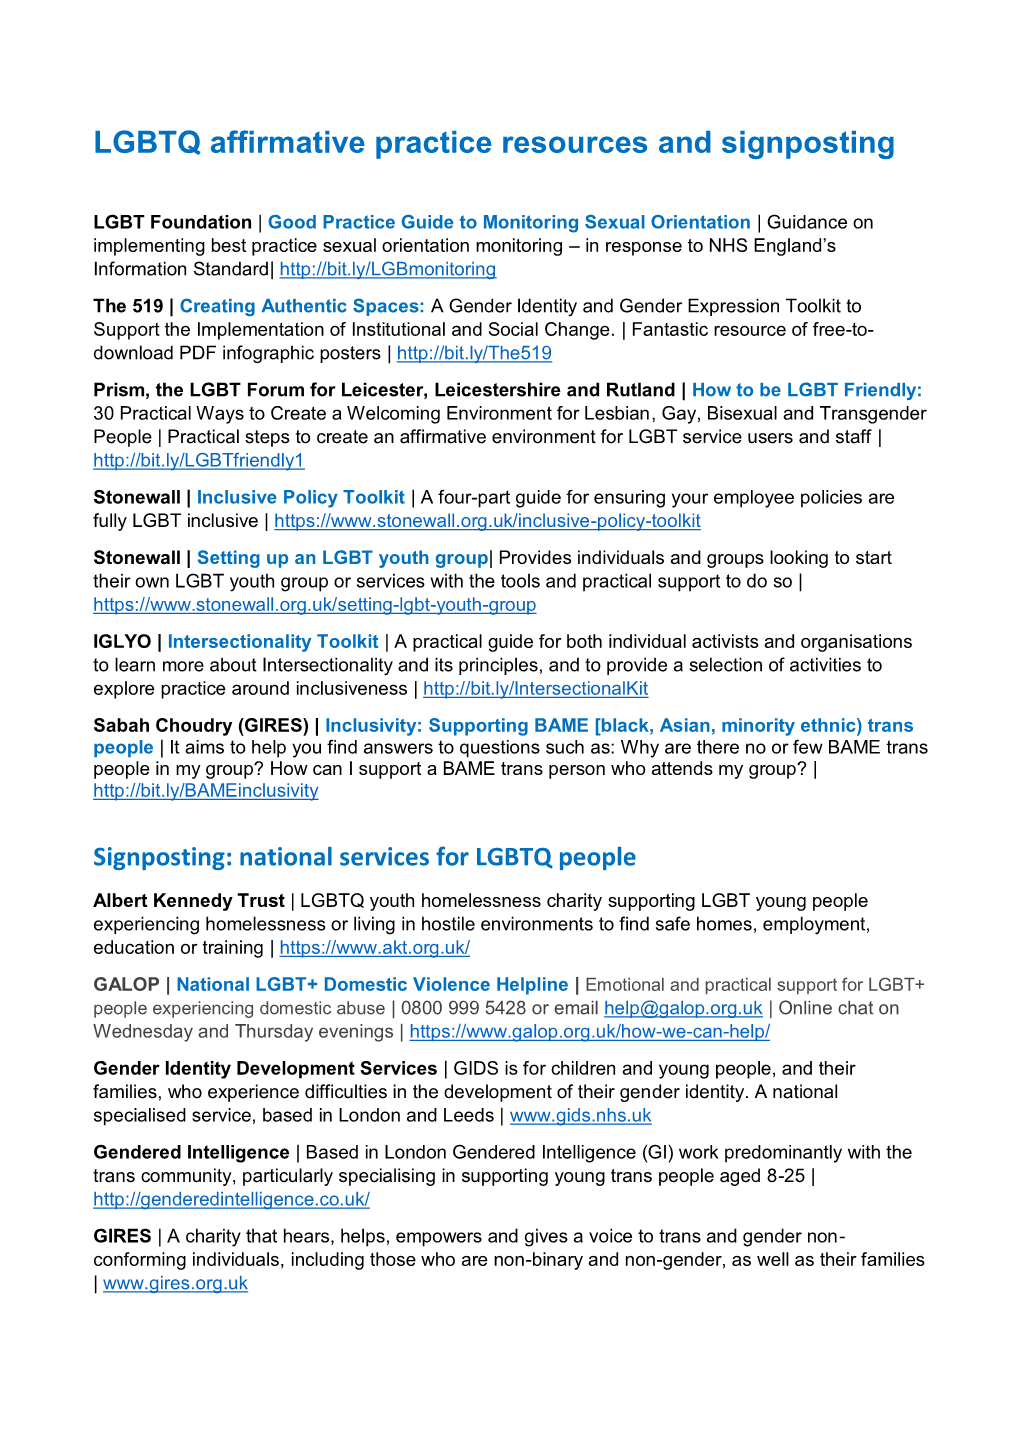 LGBTQ Inclusion Resources and Signposting